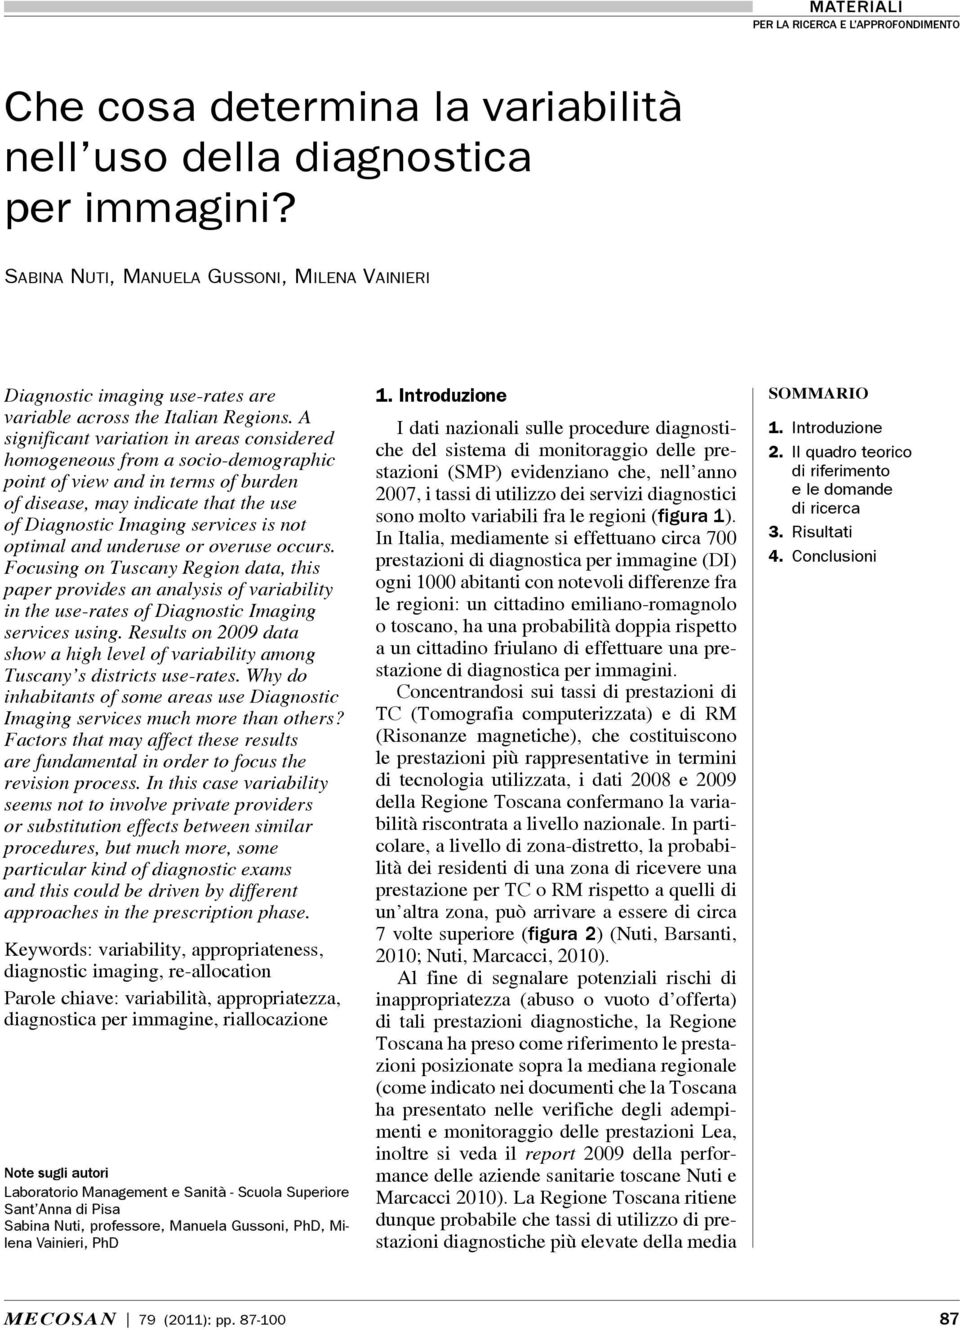 optimal and underuse or overuse occurs. Focusing on Tuscany Region data, this paper provides an analysis of variability in the use-rates of Diagnostic Imaging services using.